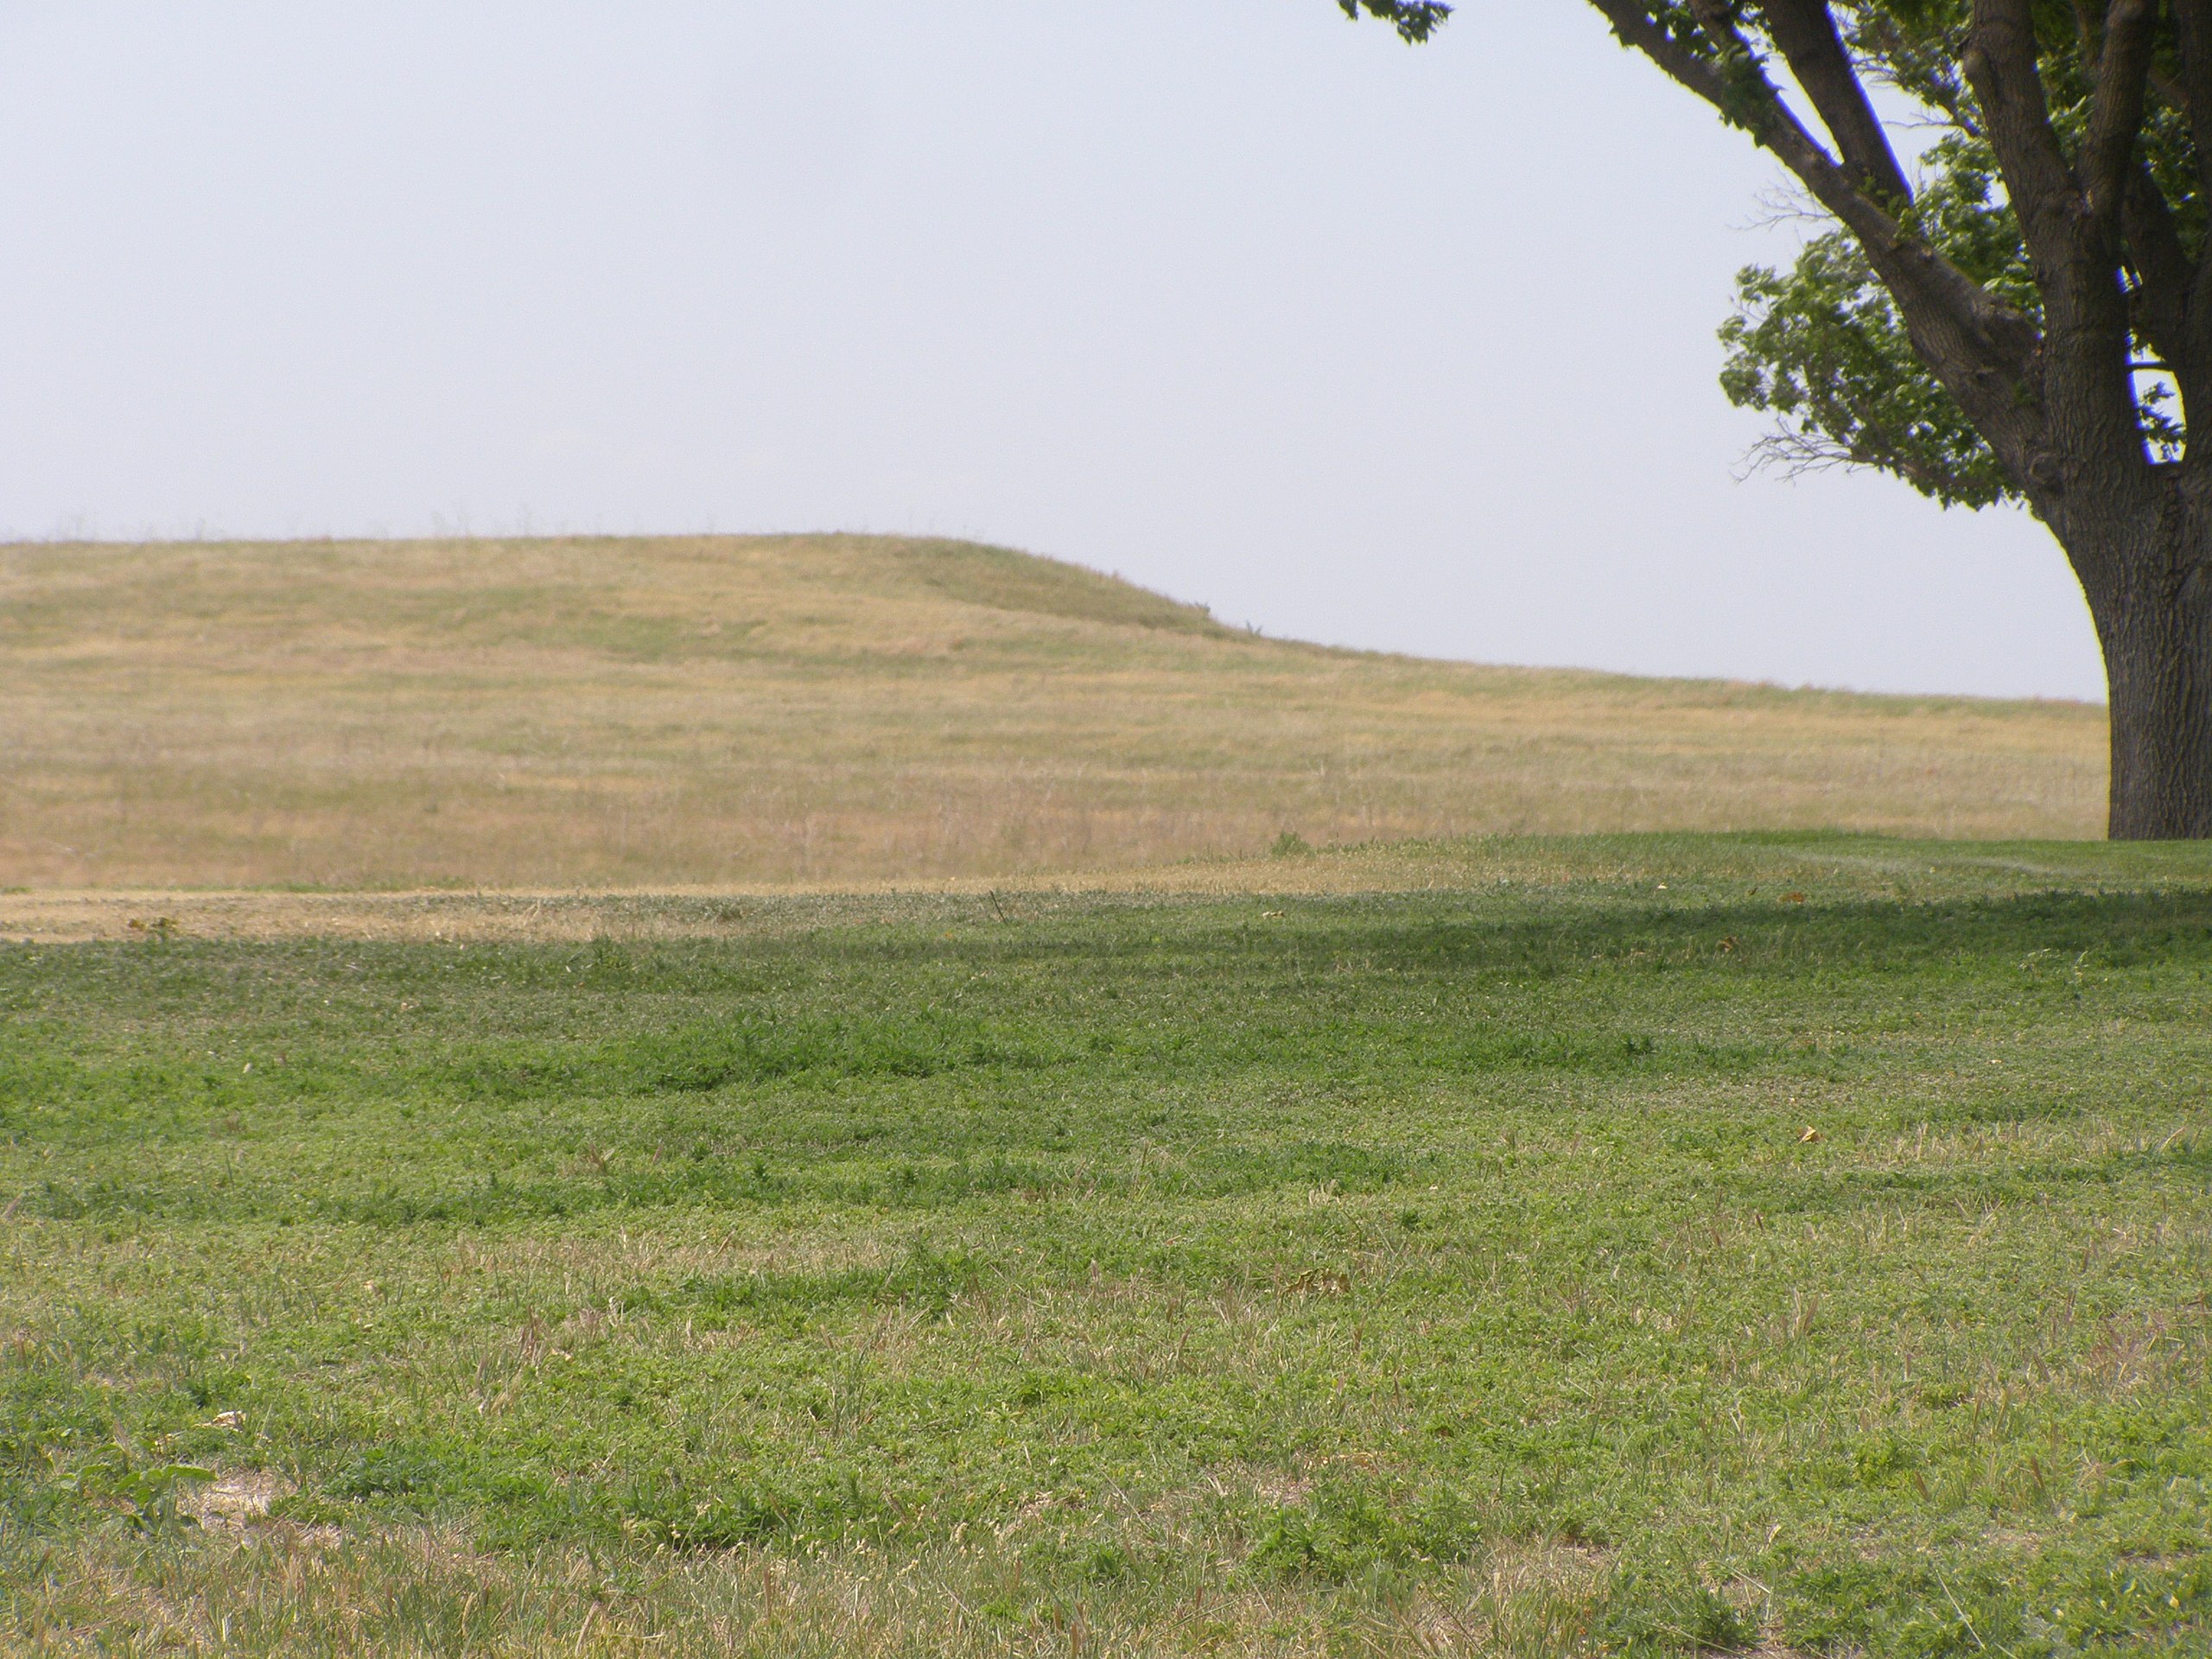 Photograph of shortgrass prairie in Nebraska, U.S.A. The photo shows a landscape with a low hill covered with short grasses. Part of a tree can be seen in the upper right of the photo.